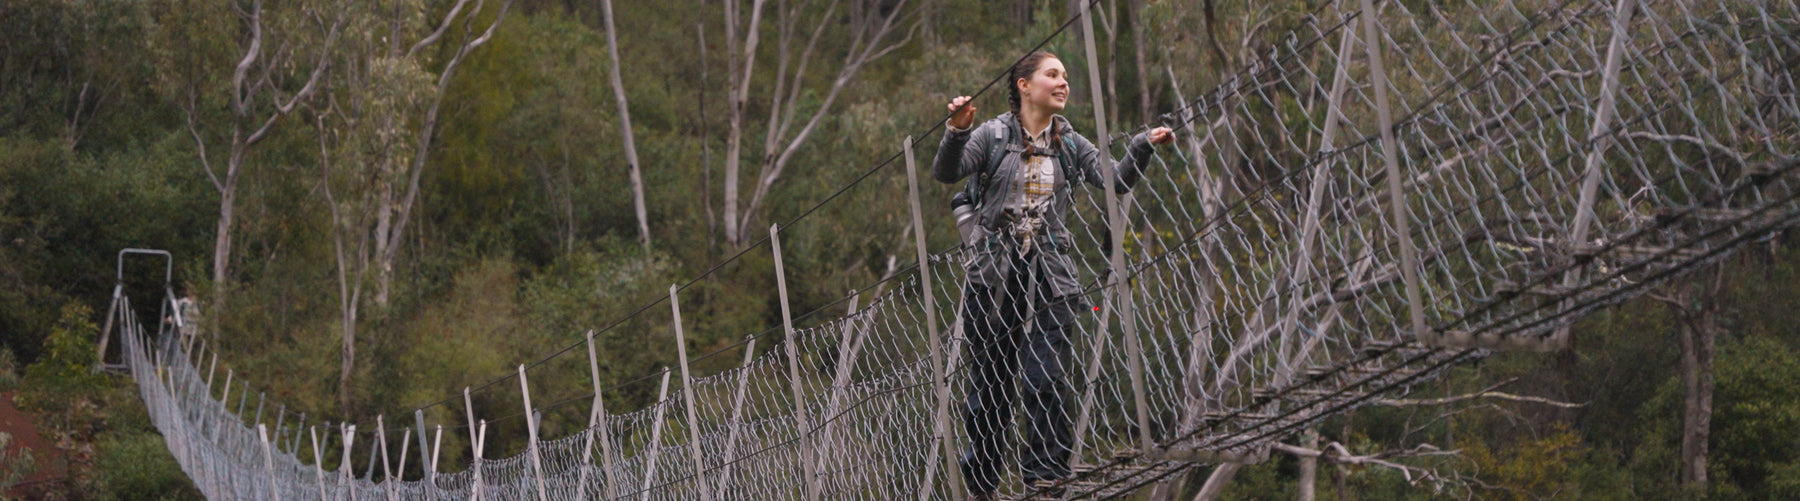 Chloe crossing the Jack Cribb Suspension bridge on the Hume and Hovell track